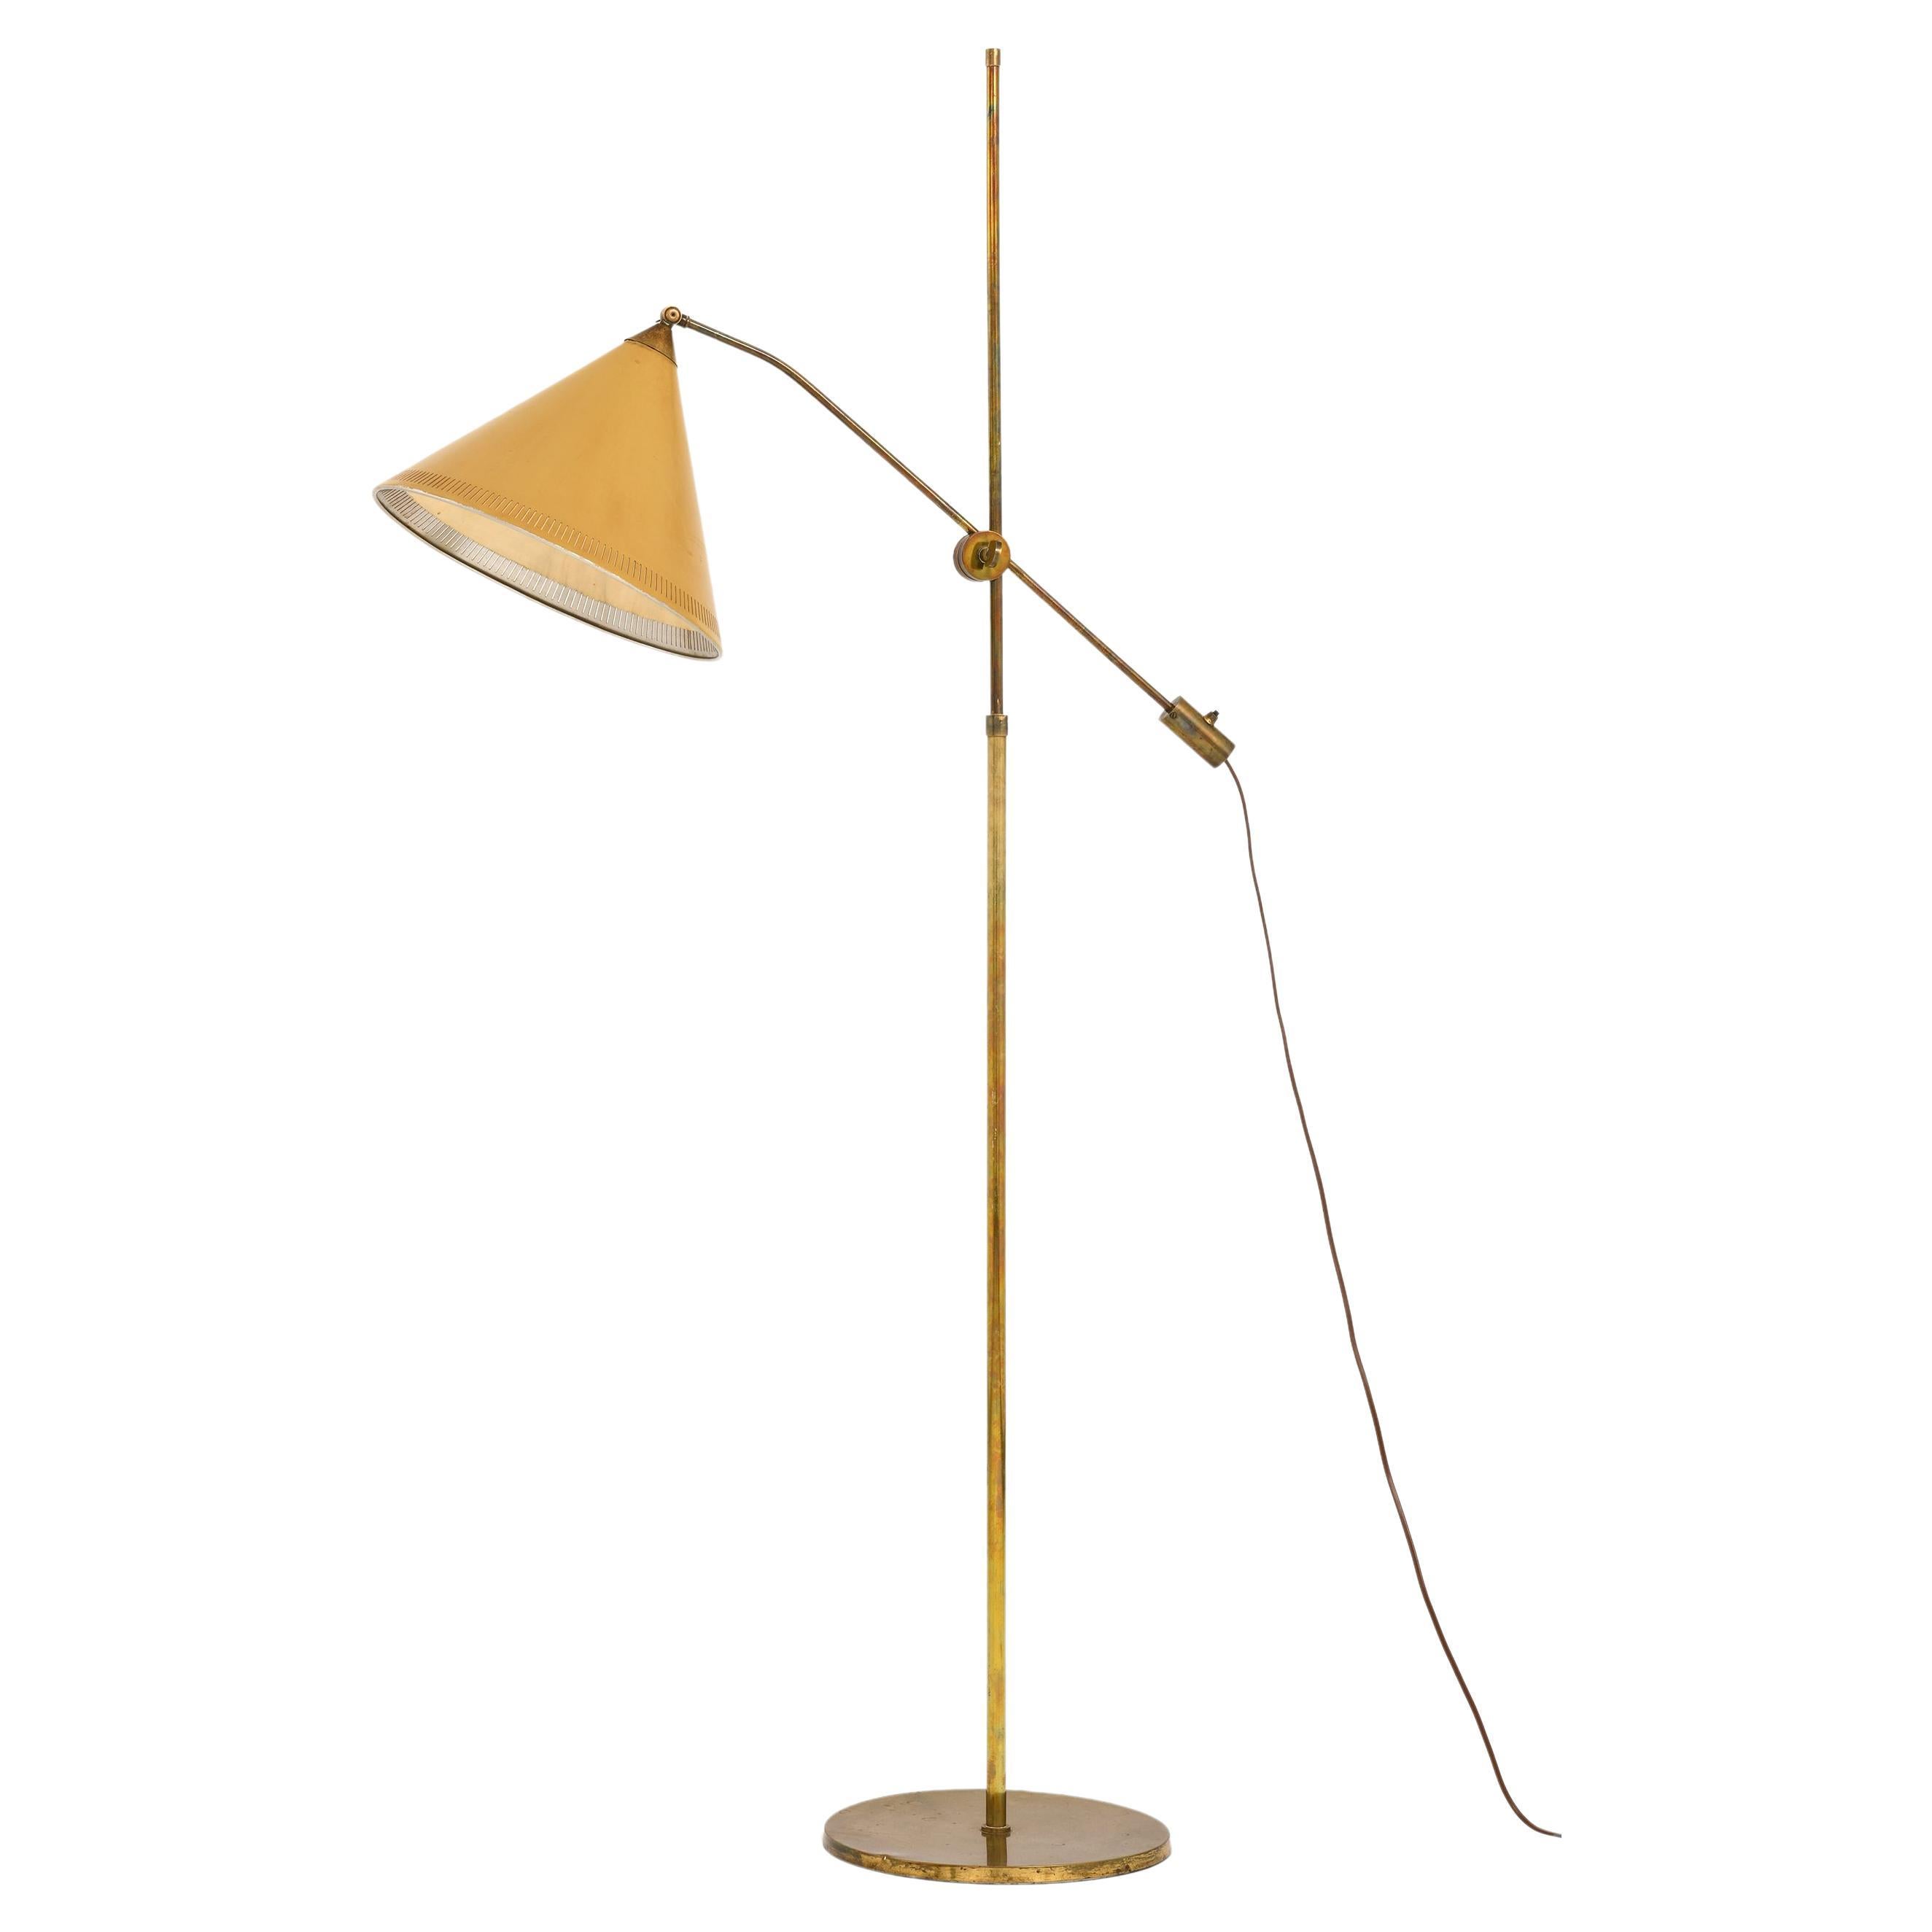 Floor Lamp in Brass and Original Yellow Lamp Shade, 1950's For Sale